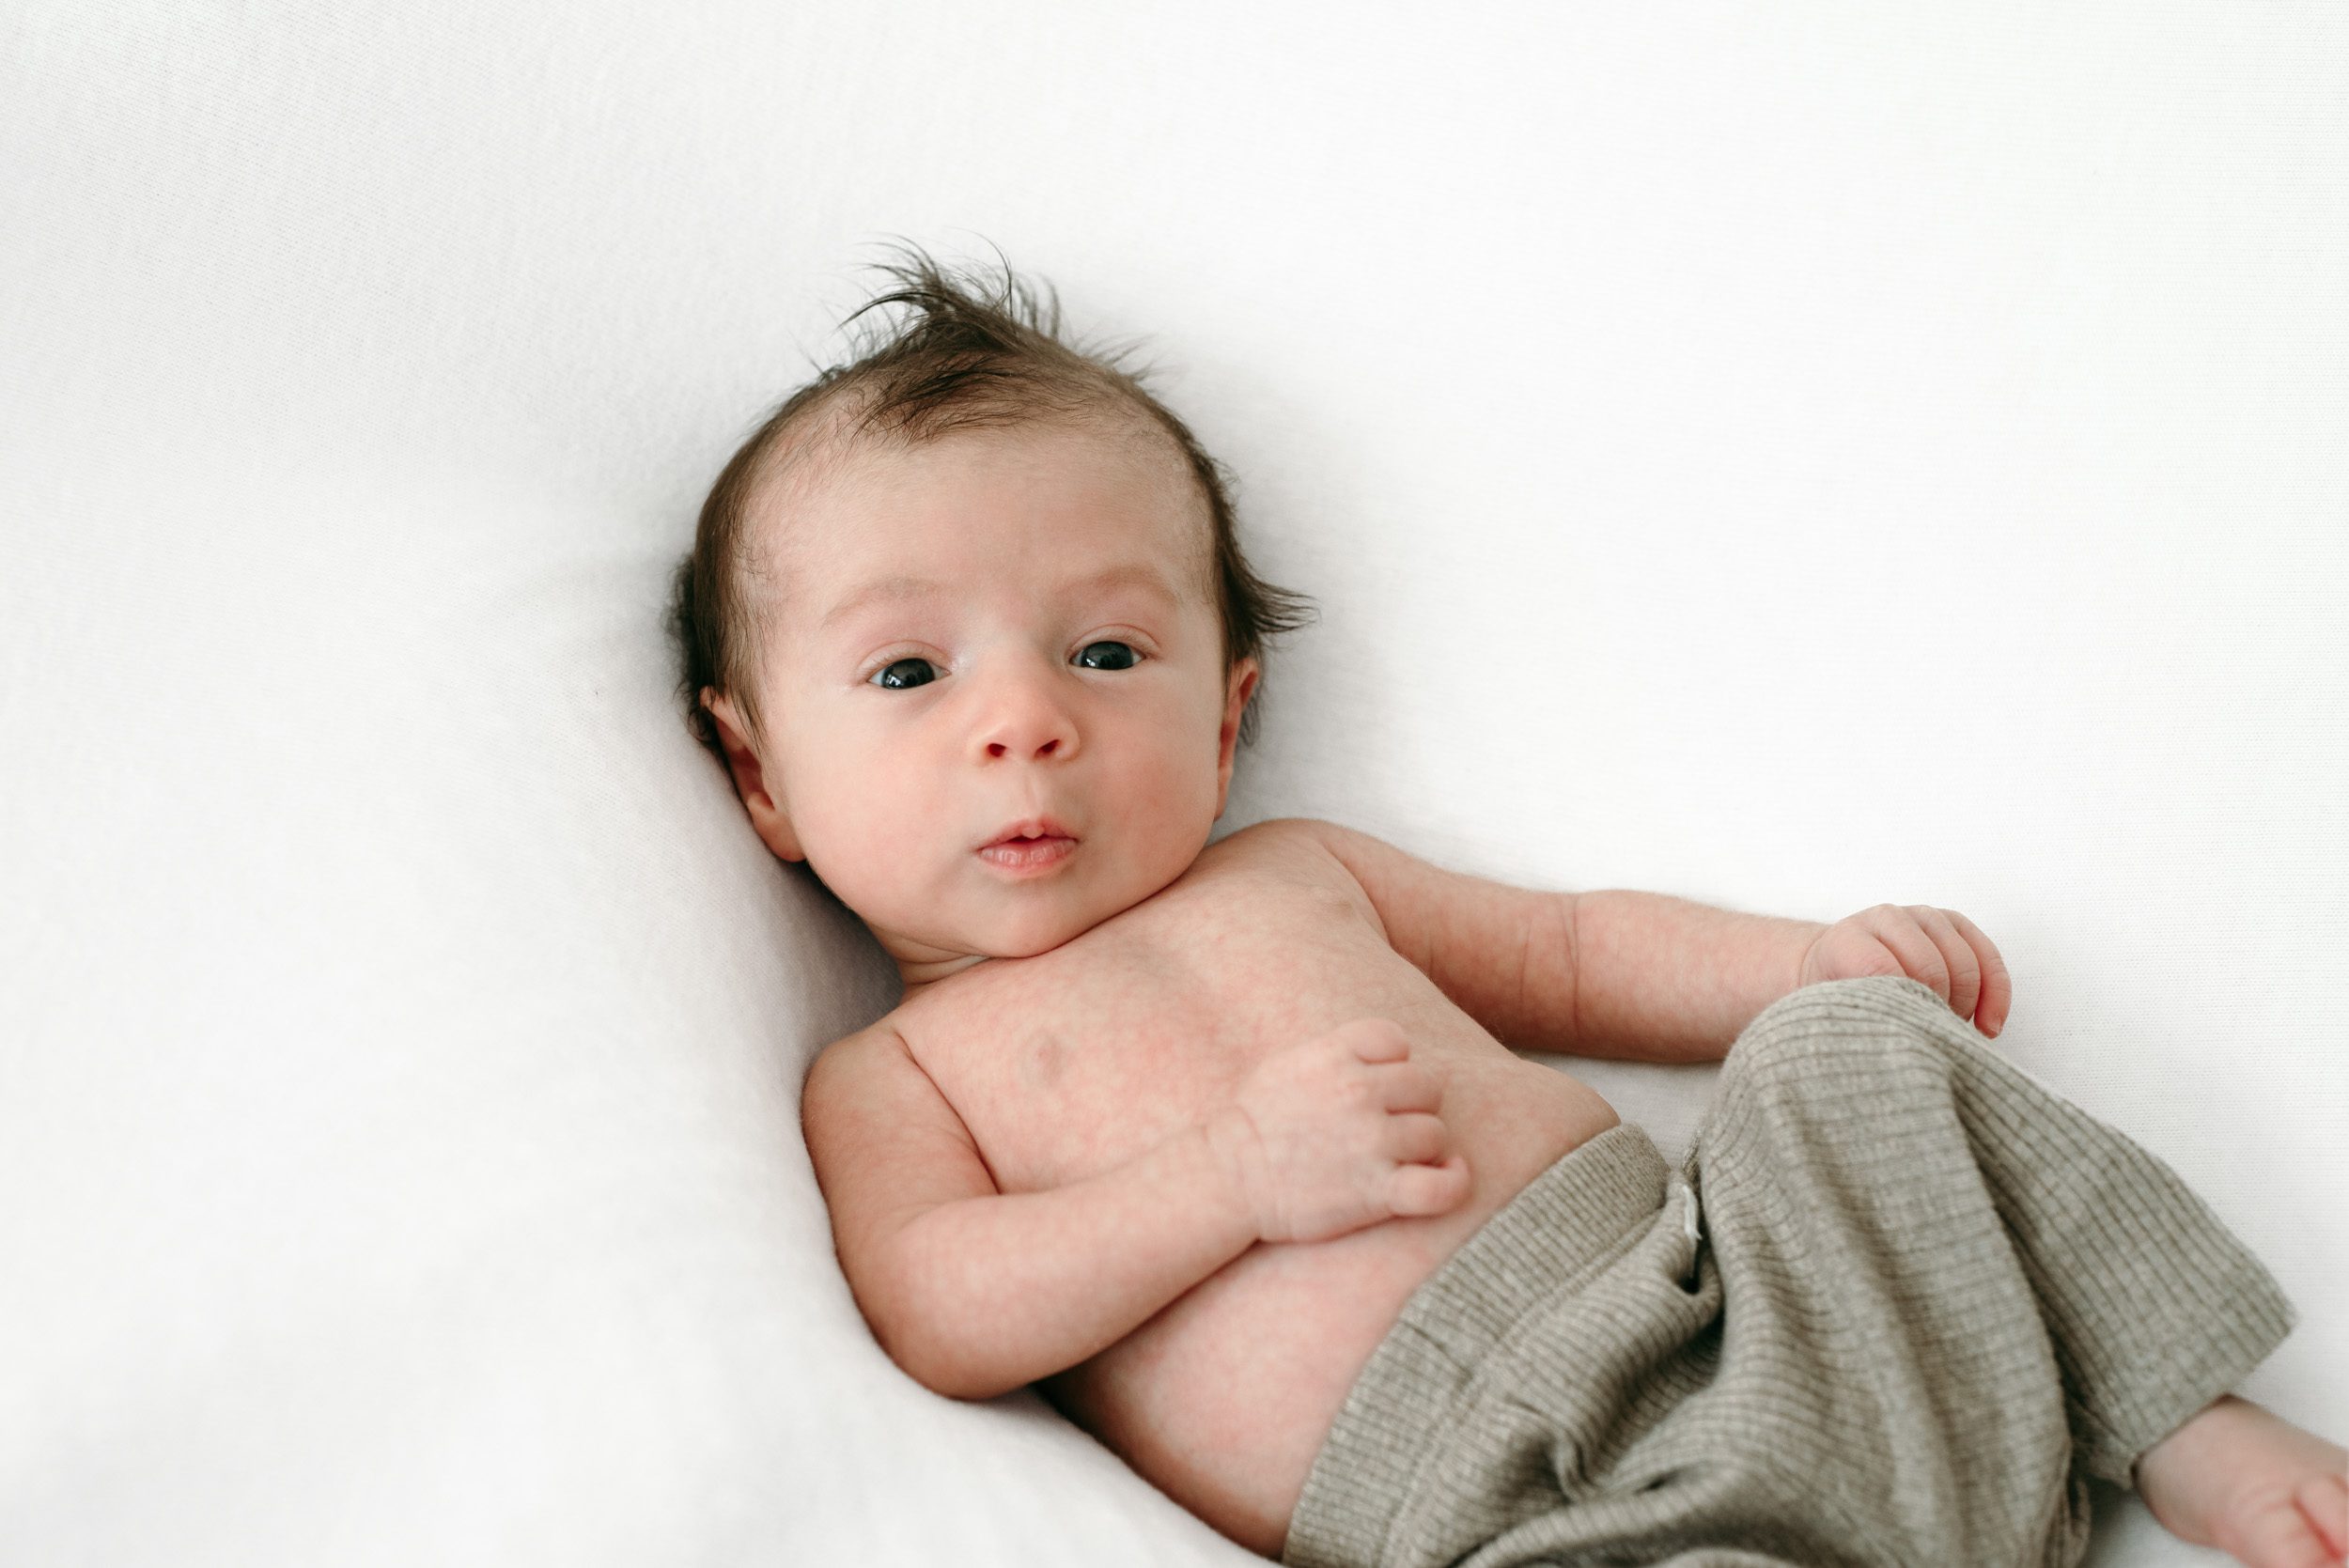 a baby boy wearing taupe pants and laying on a white backdrop looking intently at the camera during a natural newborn photo session